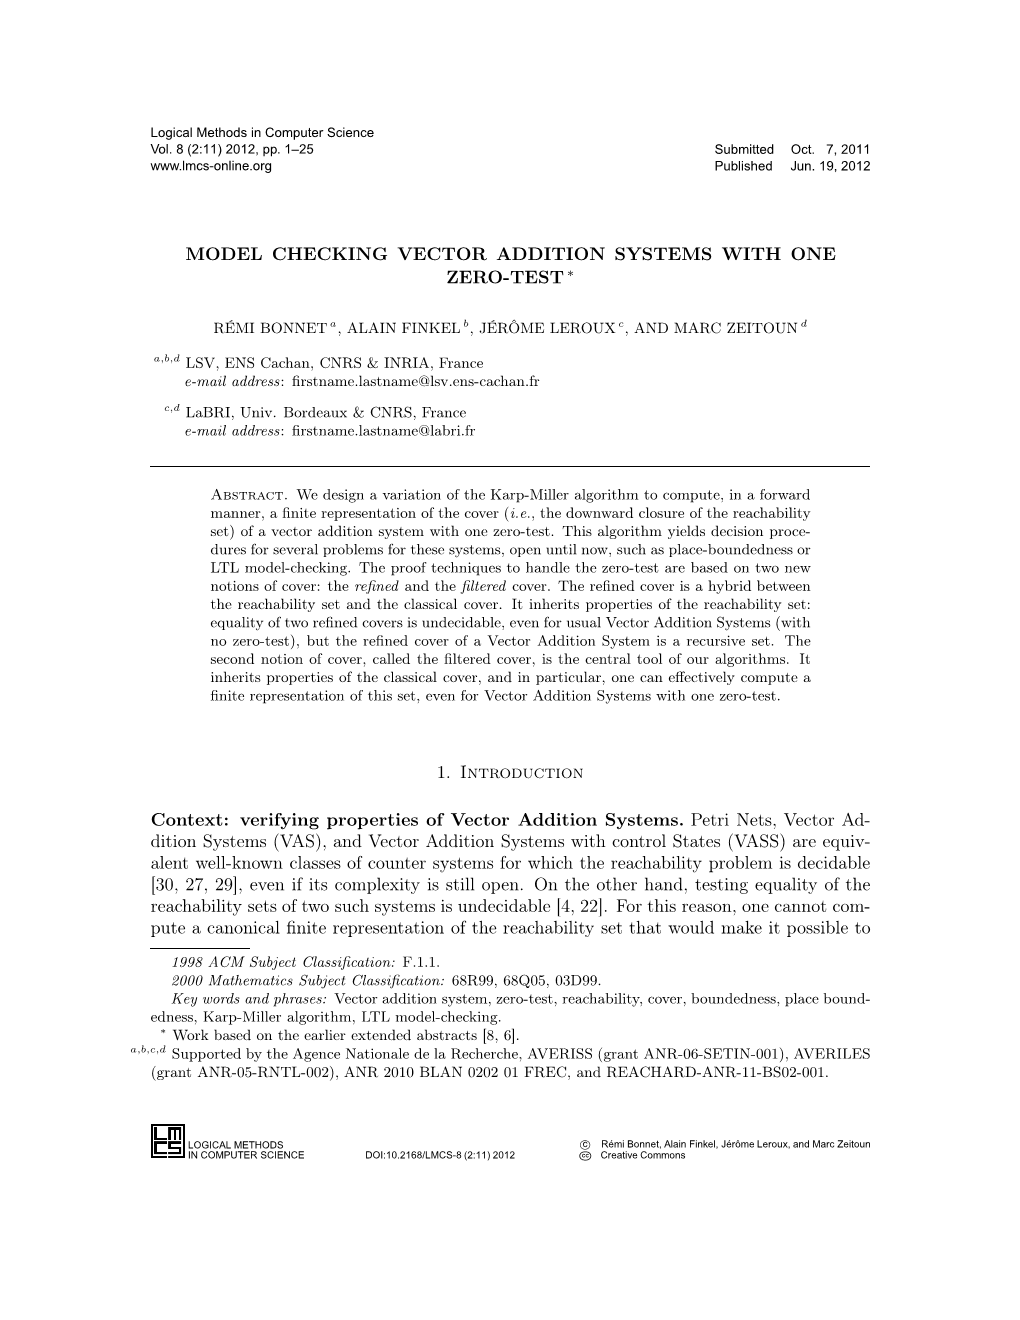 Model Checking Vector Addition Systems with One Zero-Test ∗